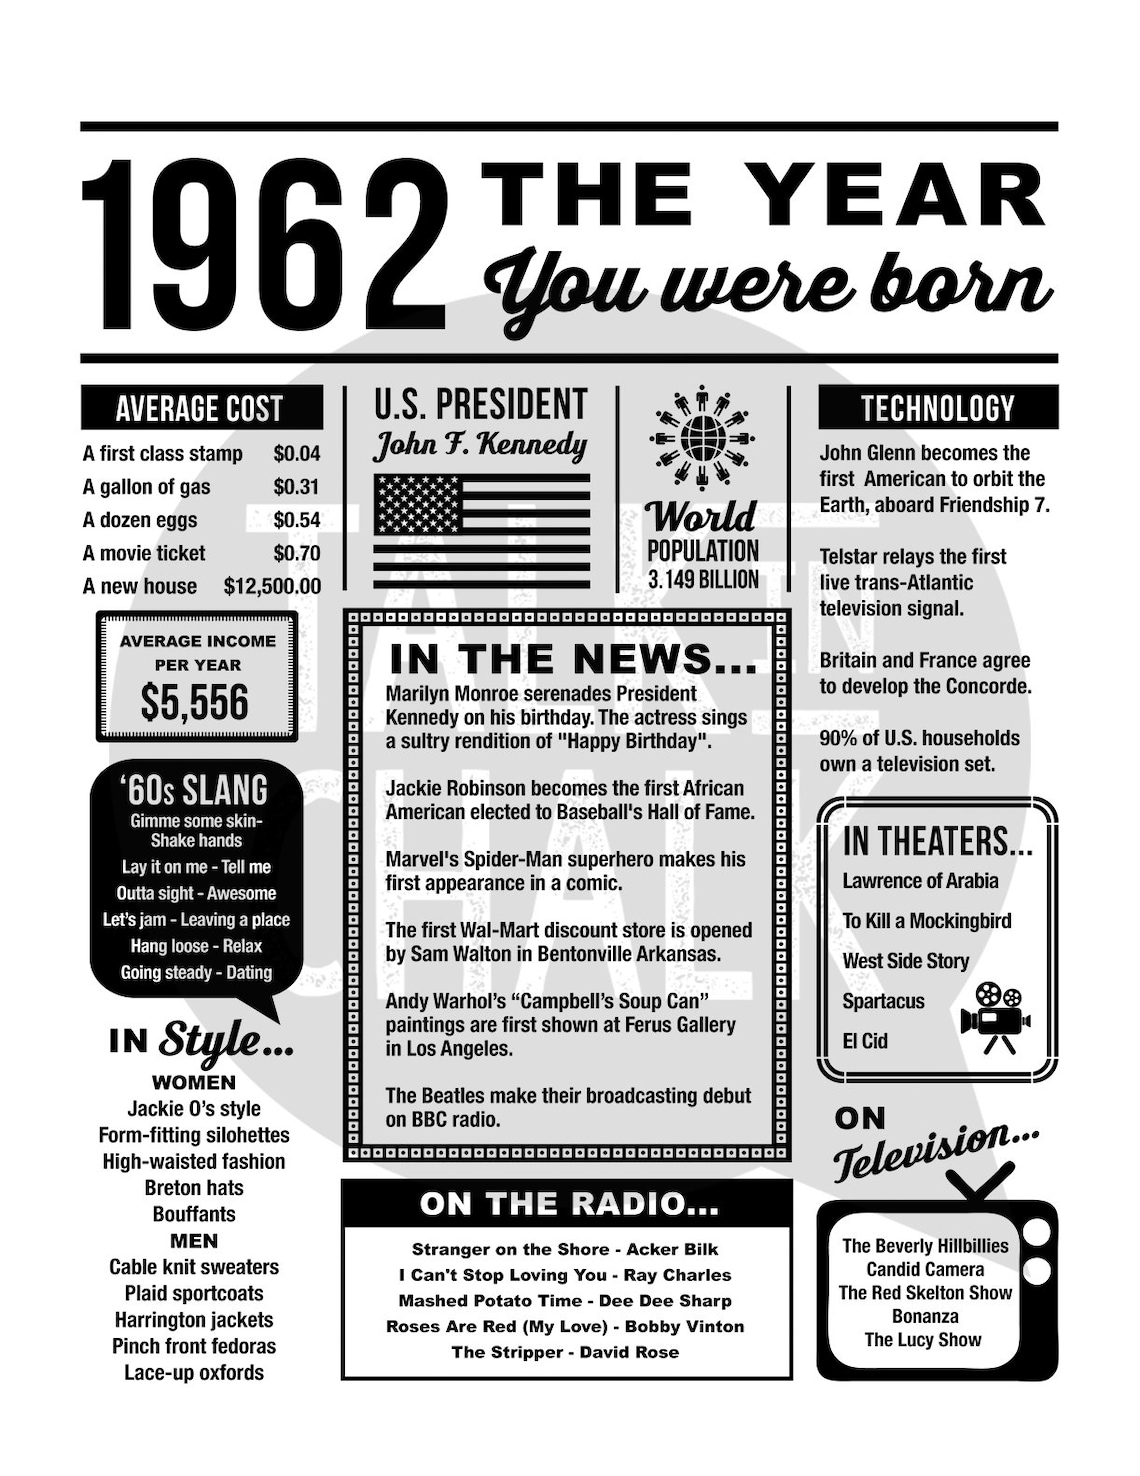 1962-the-year-you-were-born-printable-1962-printable-etsy